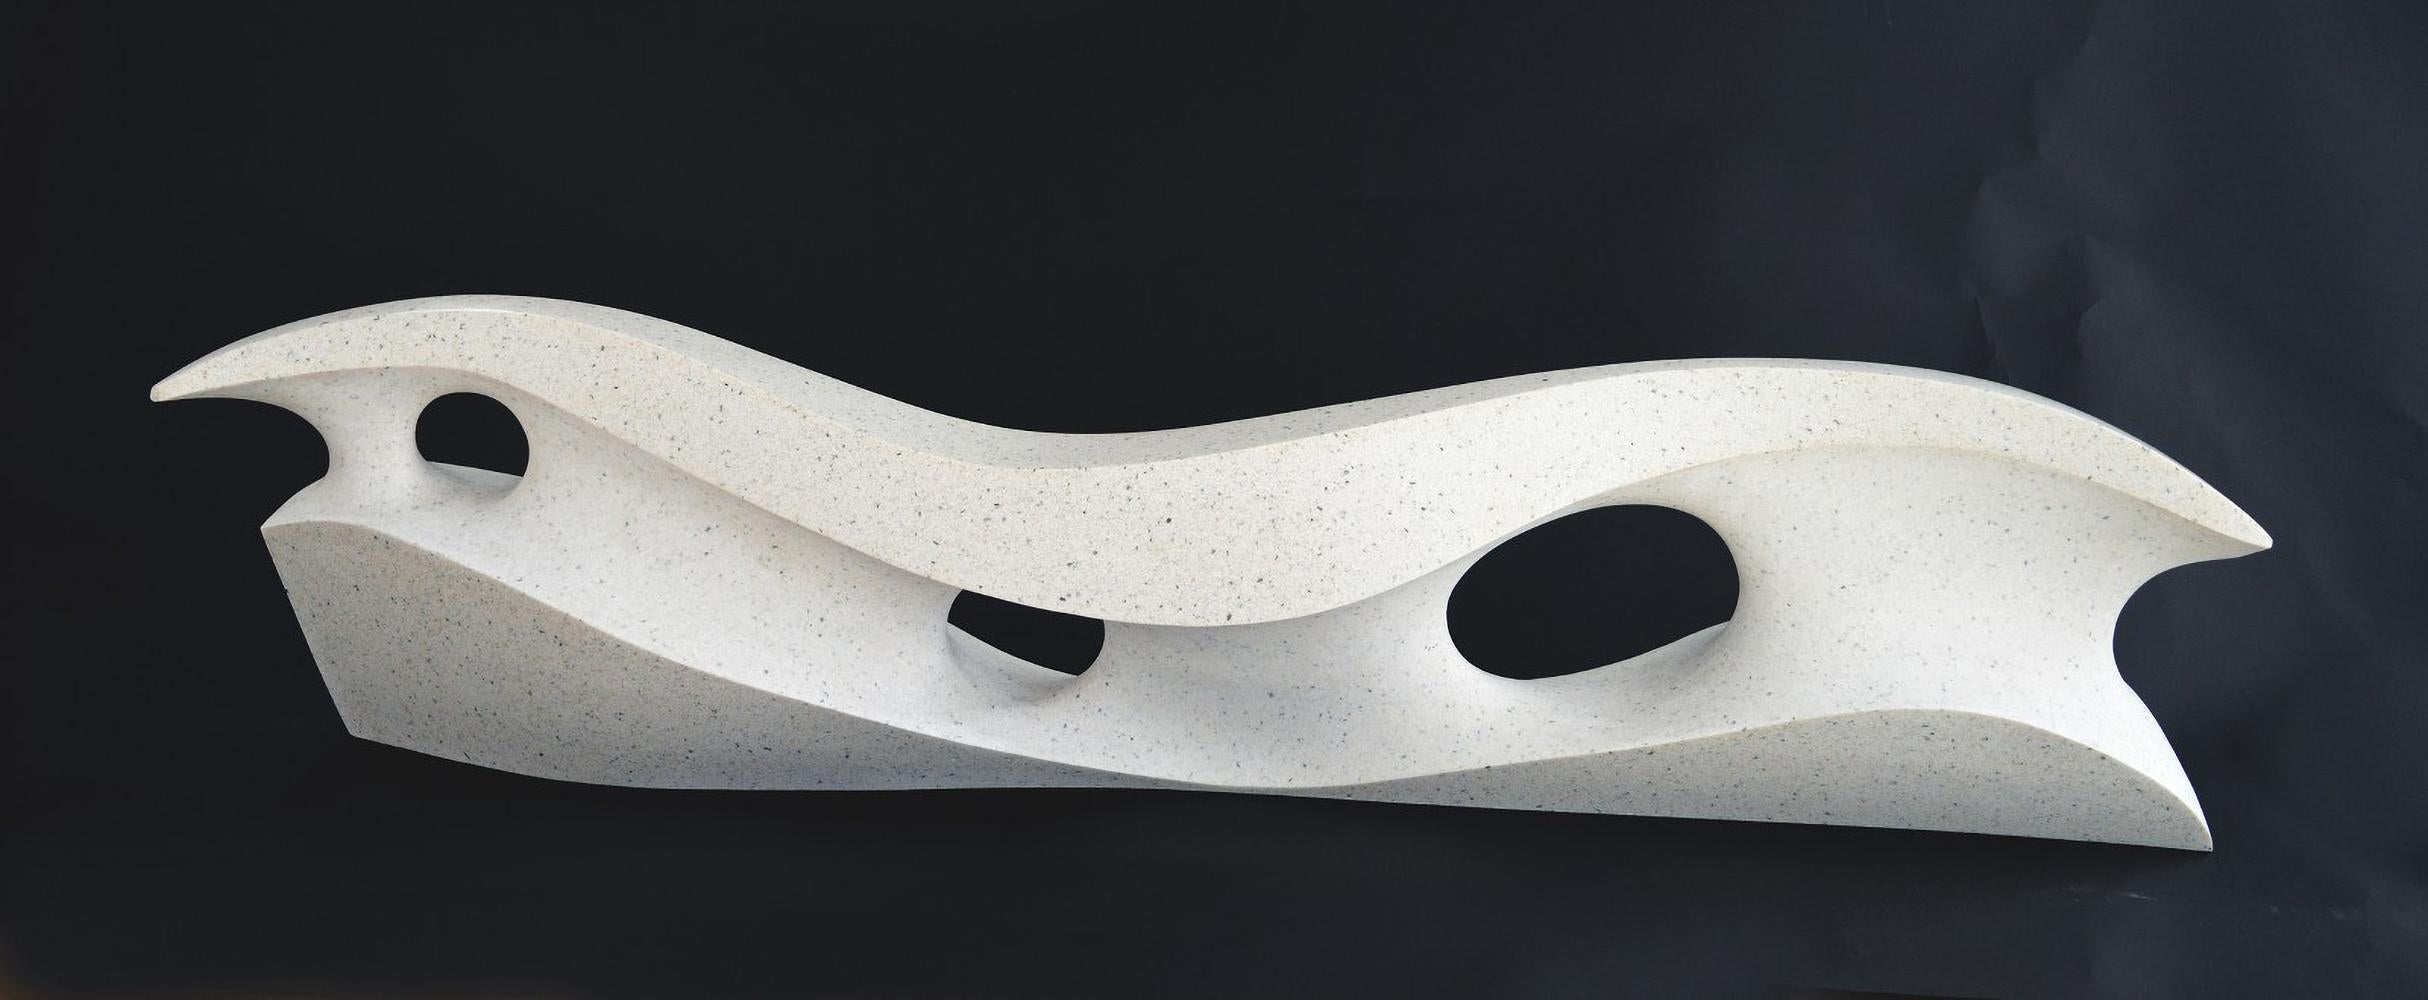 White Water - long, smooth, abstracted, engineered white marble sculpture - Sculpture by Jeremy Guy